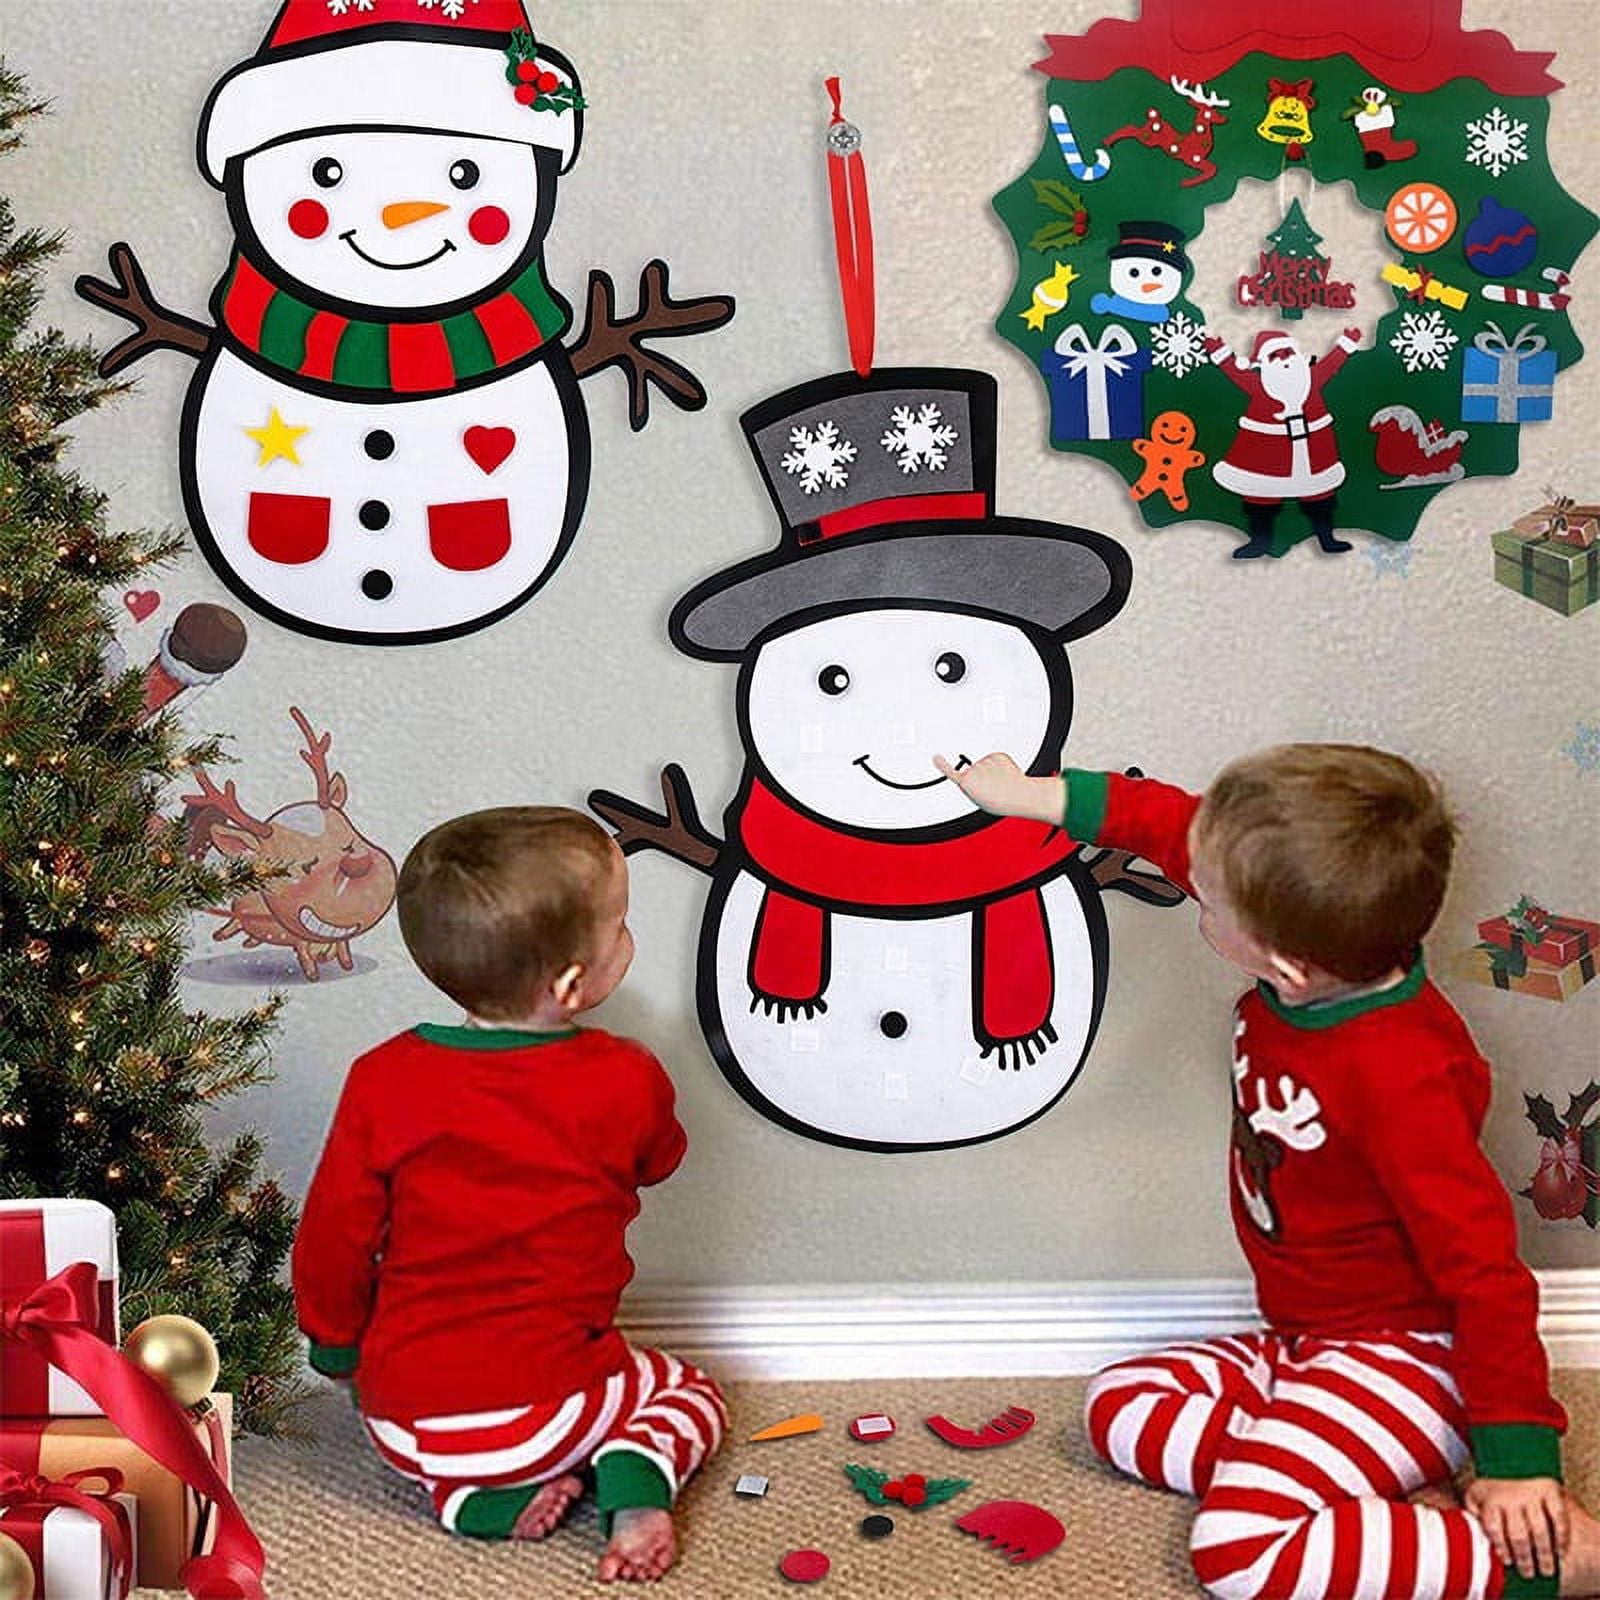 OAVQHLG3B DIY Felt Snowman Set with Detachable Ornaments Christmas Tree  Hanging Ornaments, 19x39 Inches Xmas Wall Hanging Games for Christmas  Decorations 